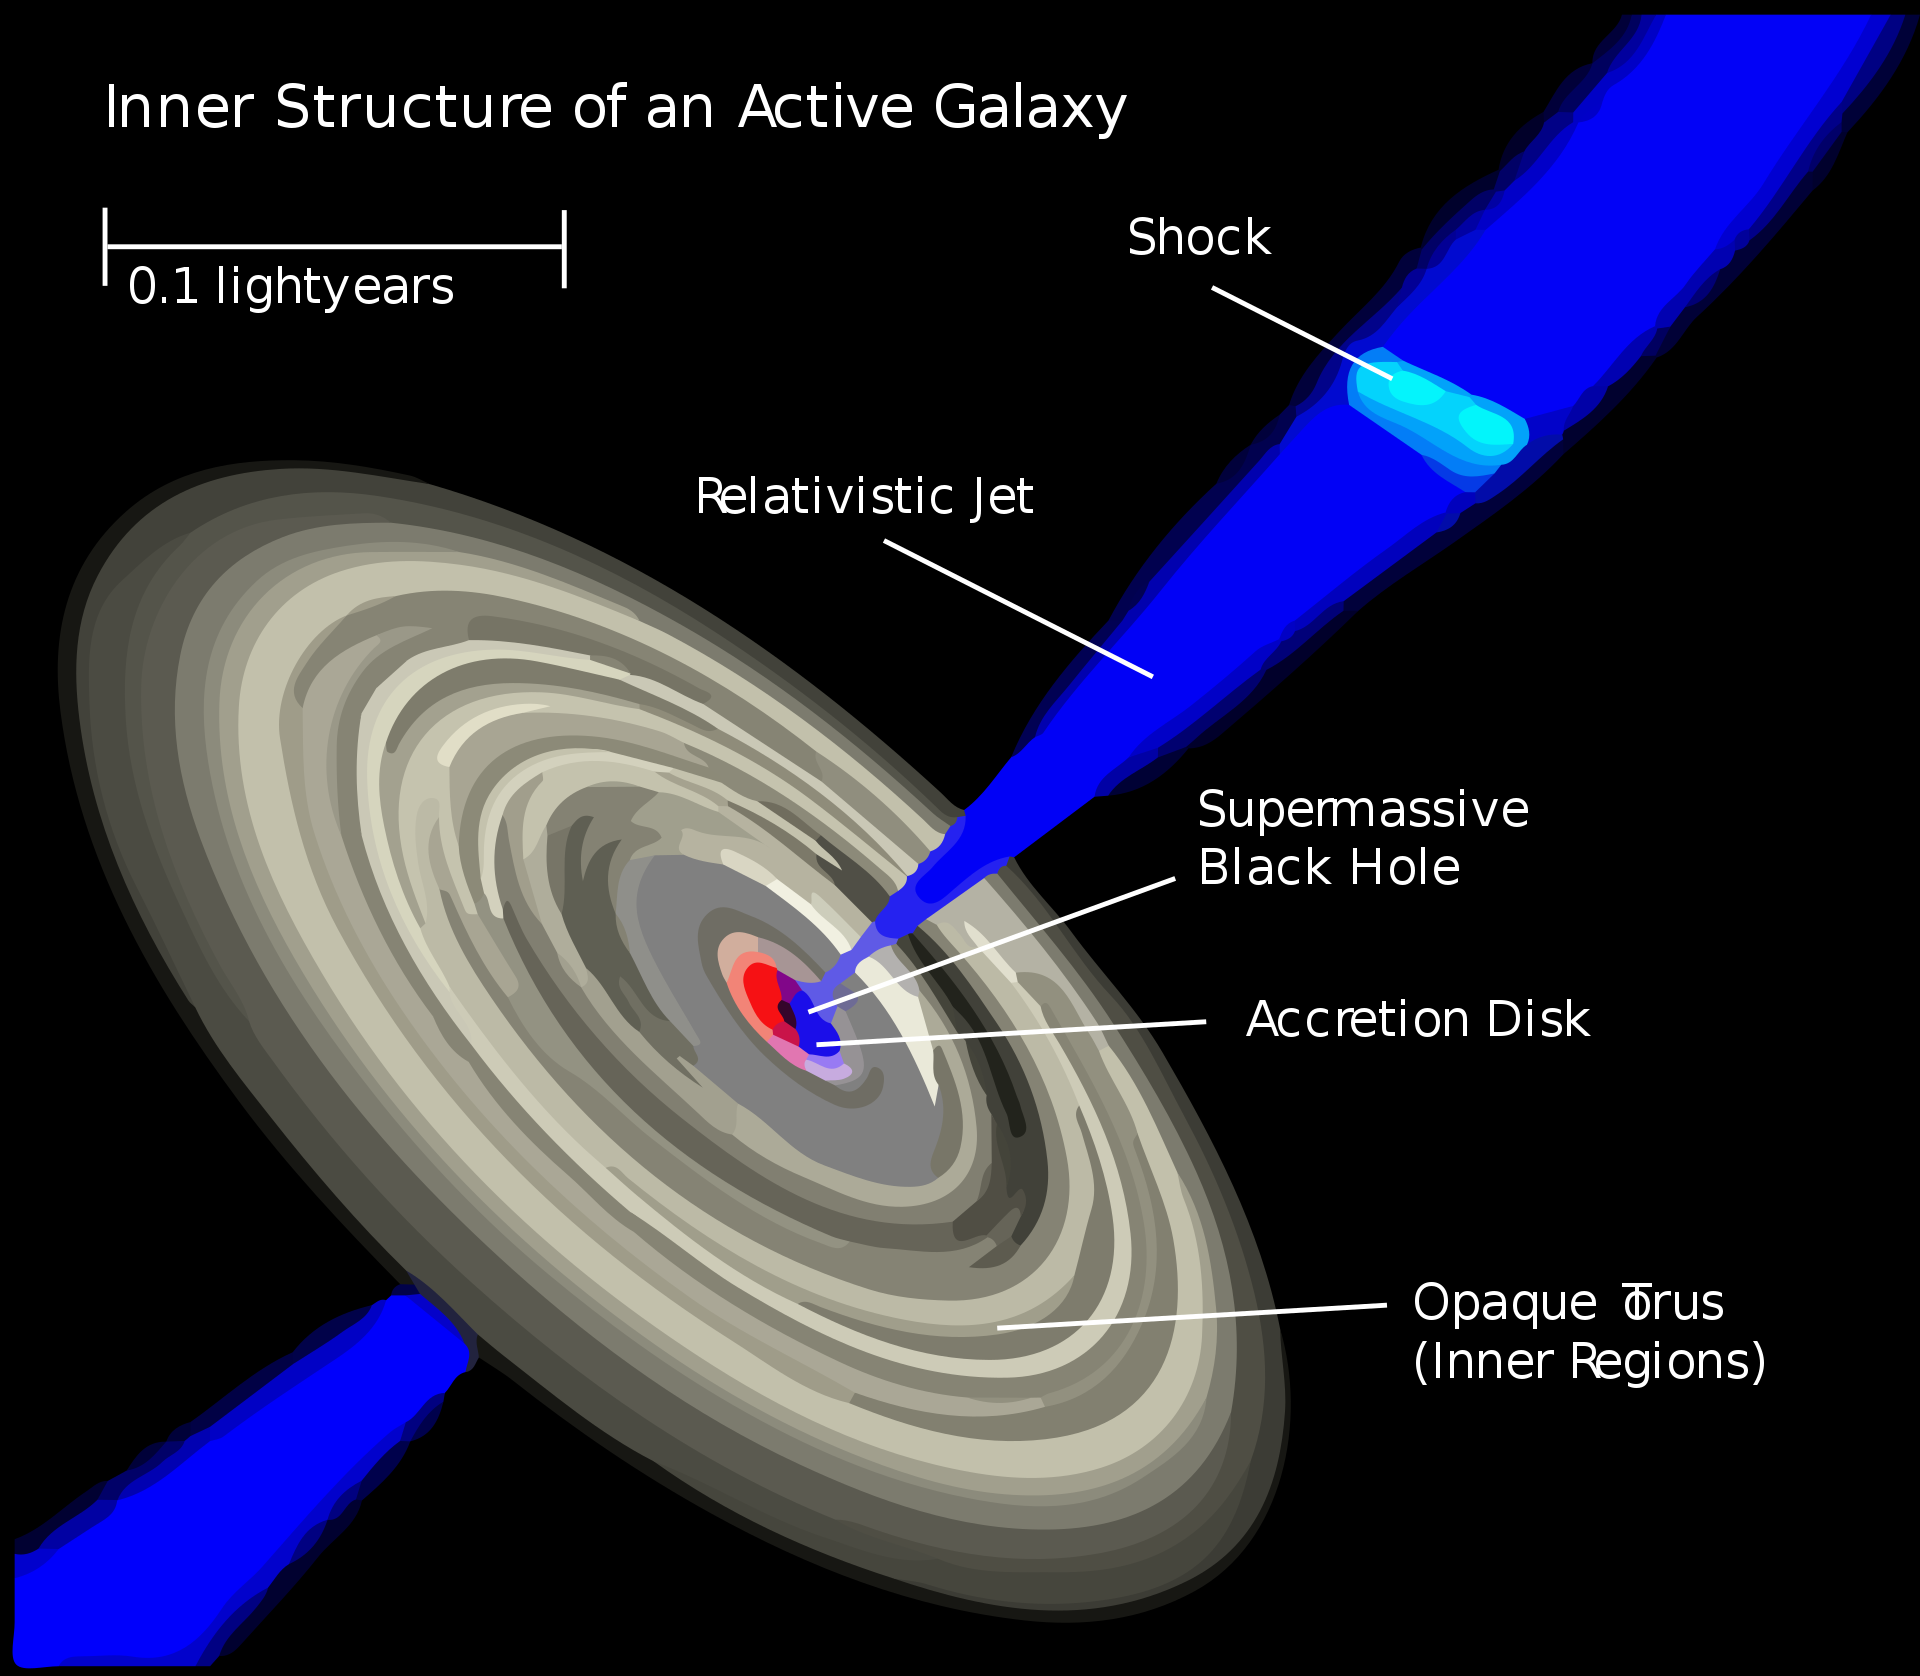 Illustration showing the inner structure of an active galaxy